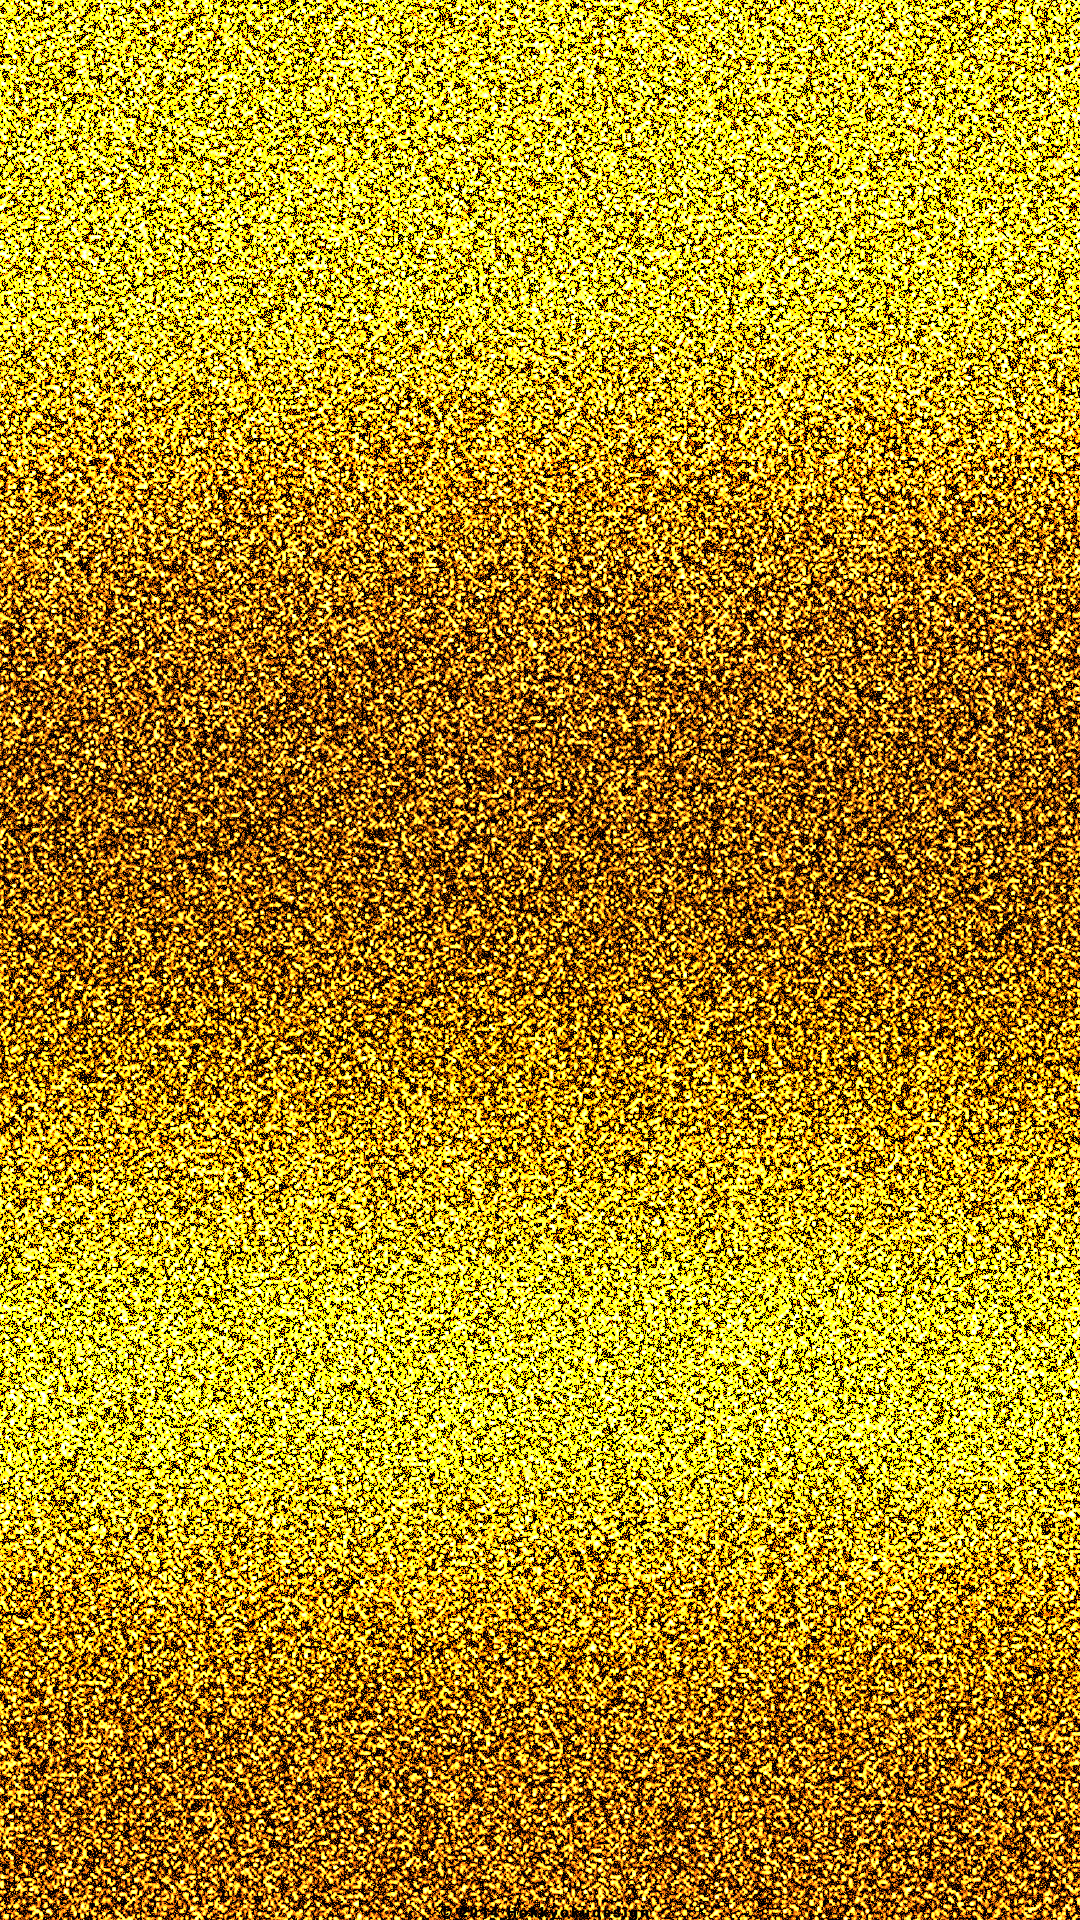 IPhone Wallpaper] Gold Dust [twinkle .iphone Wallpaper.pics